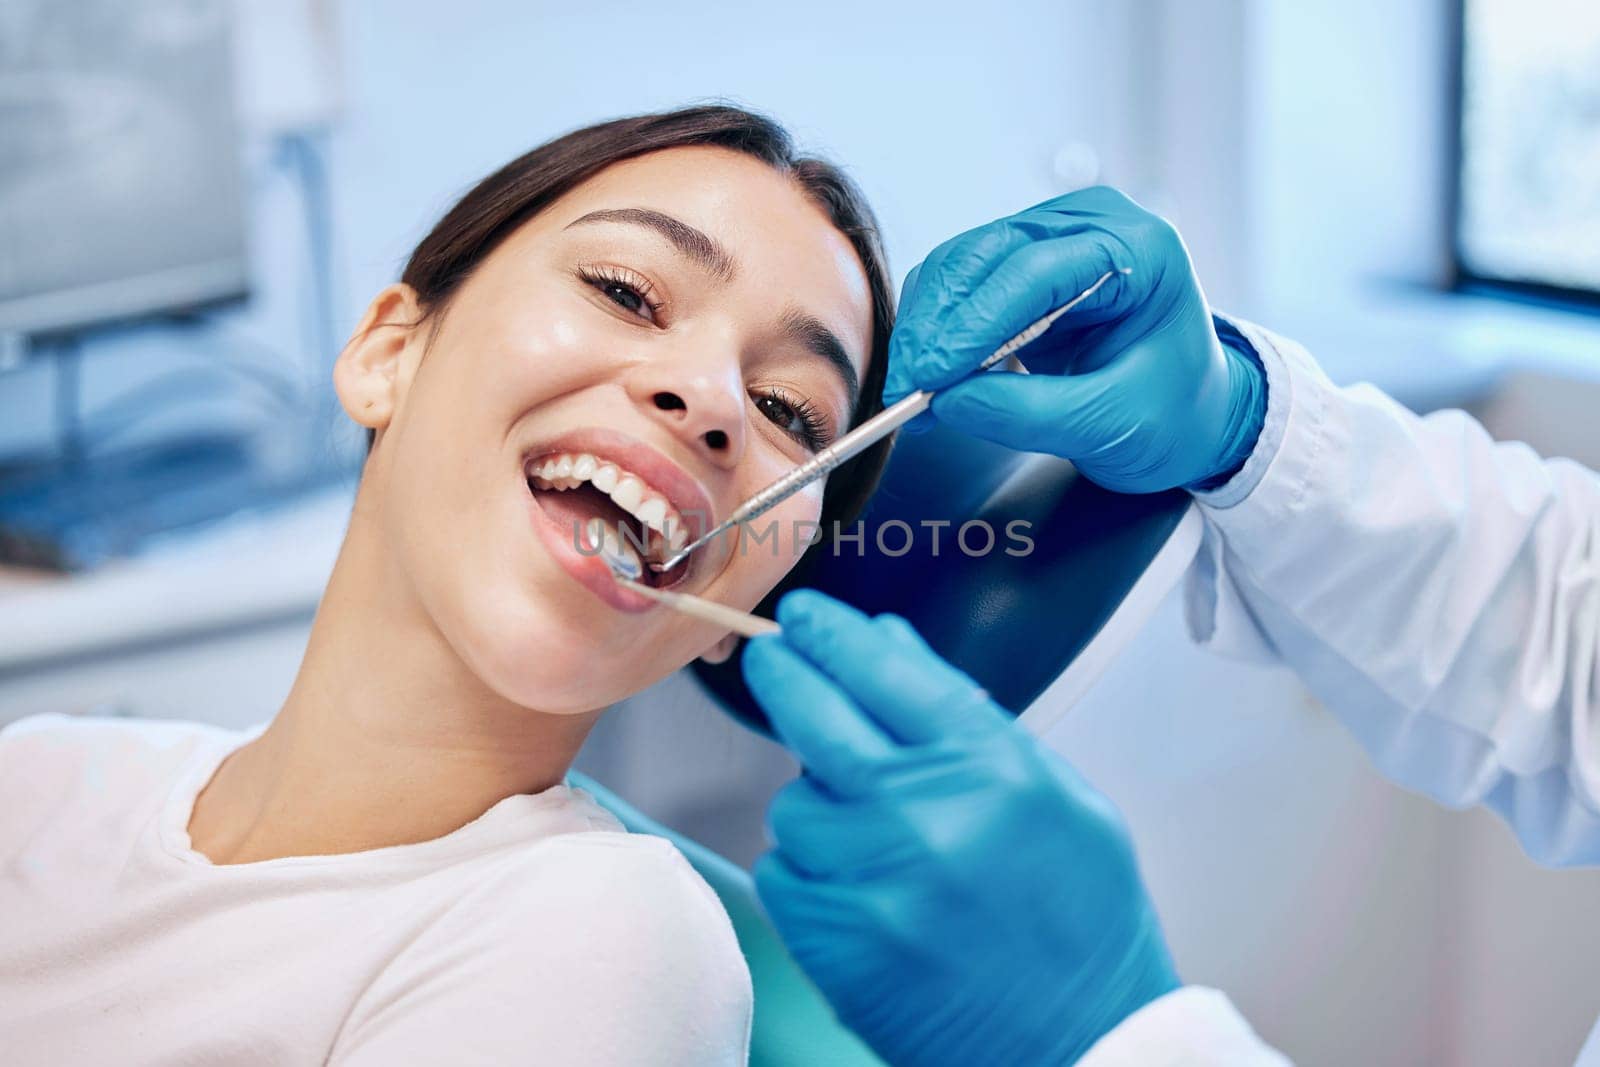 Healthcare, dentist tools and portrait of woman for teeth whitening, service and dental care. Medical consulting, dentistry and orthodontist with patient for oral hygiene, wellness and cleaning.